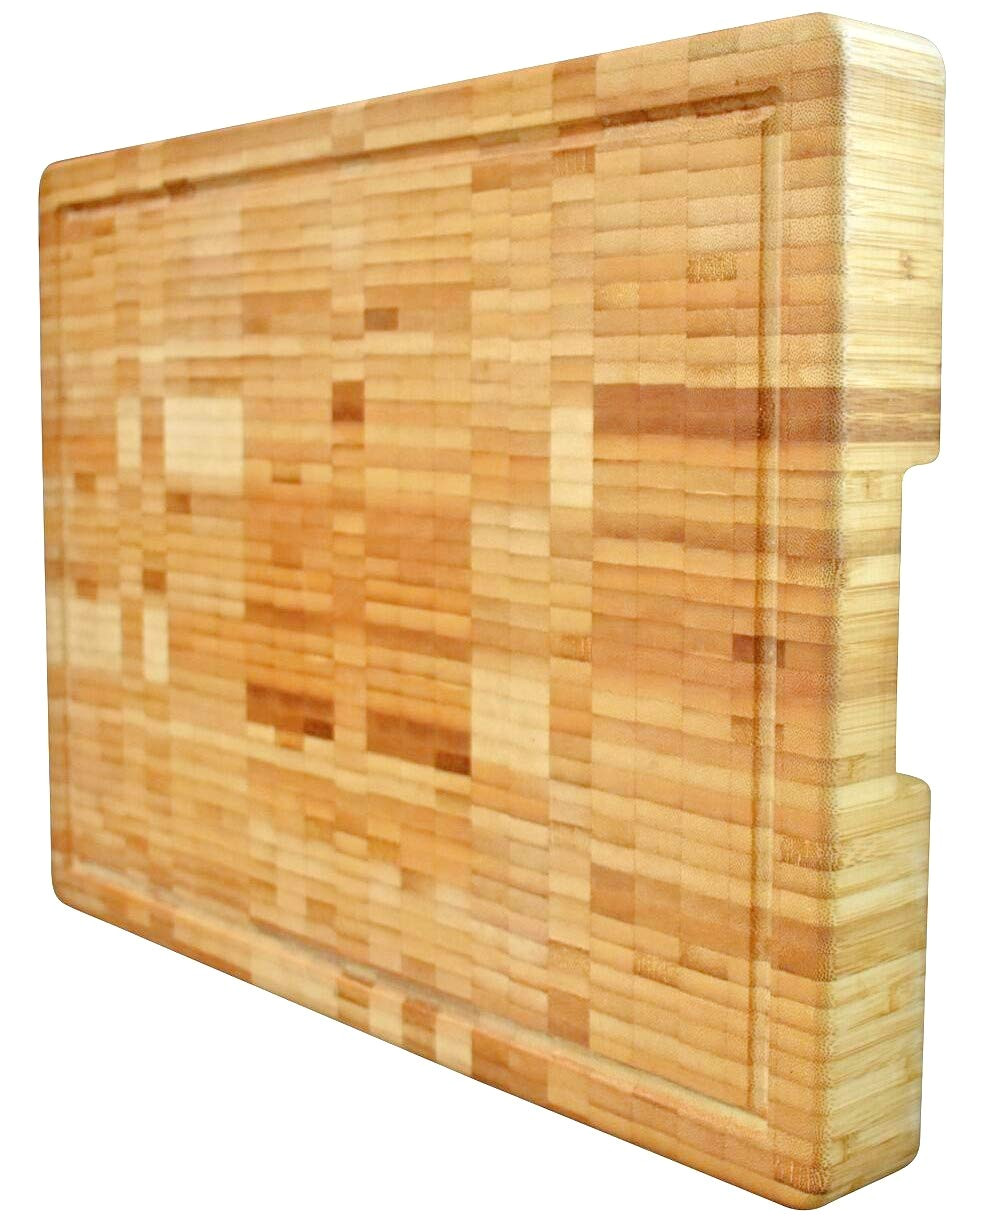 amazon com extra large organic bamboo cutting board end grain butcher block thick heavy solid 18 x 13 x 2 inch anti bacterial wood great for wooden